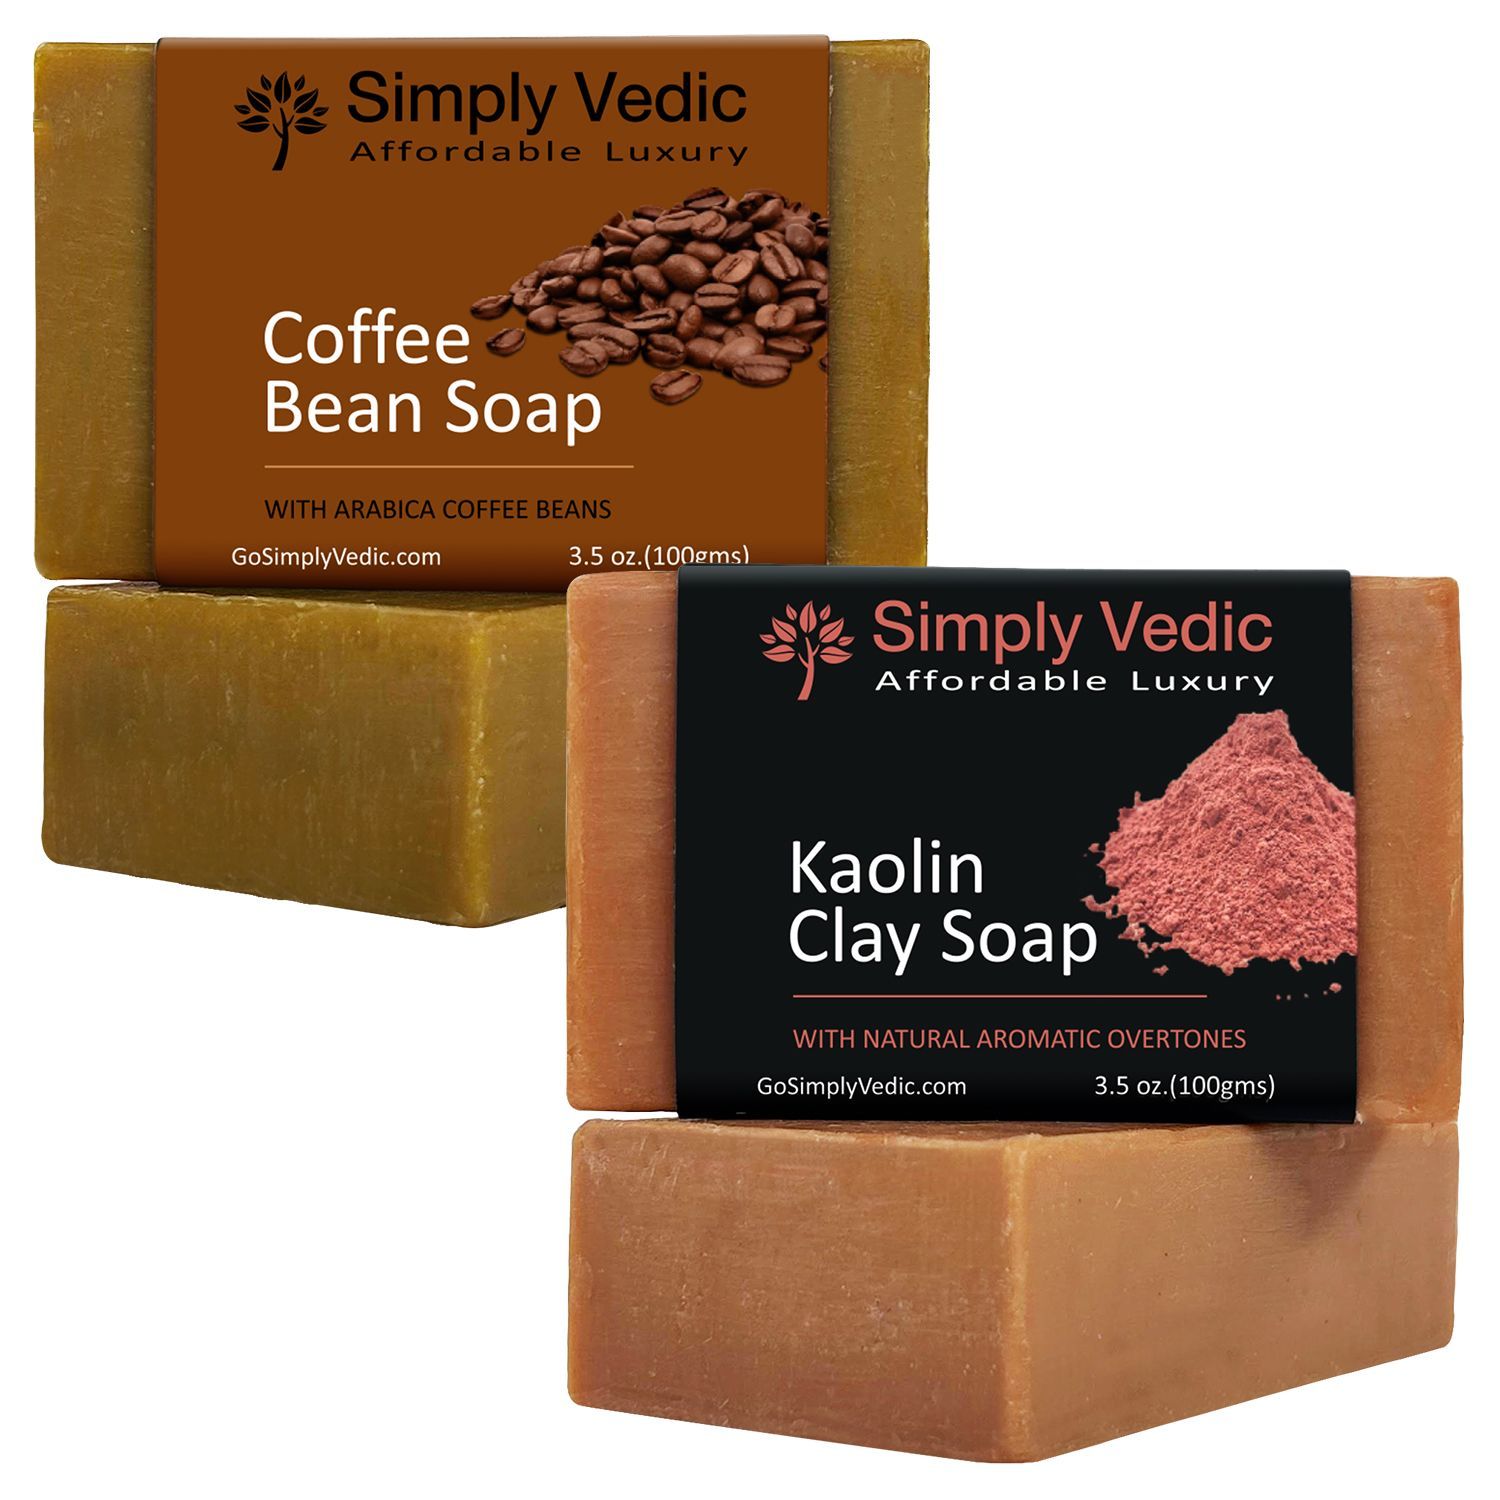 Simply Vedic Pack of 2 Herbal Soap Bar Collection For Body, Hand, Face; Coffee Bean Soap(1), Kaolin Clay (1). Cold Pressed with Coconut Oil, Handmade.